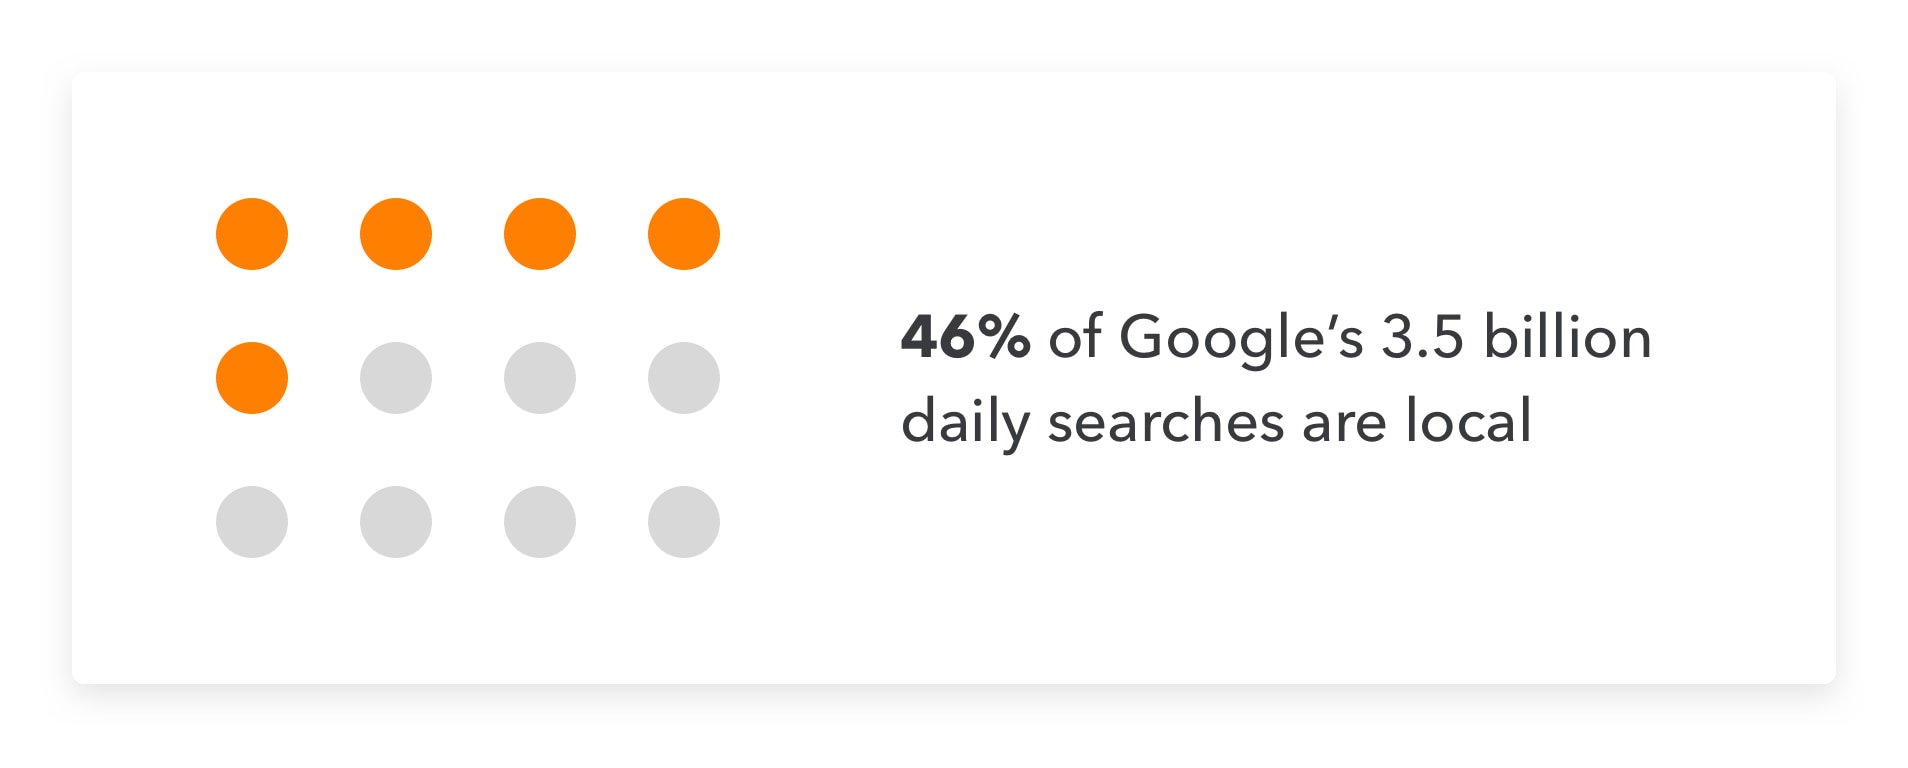 Google search statistics relating to small business marketing.